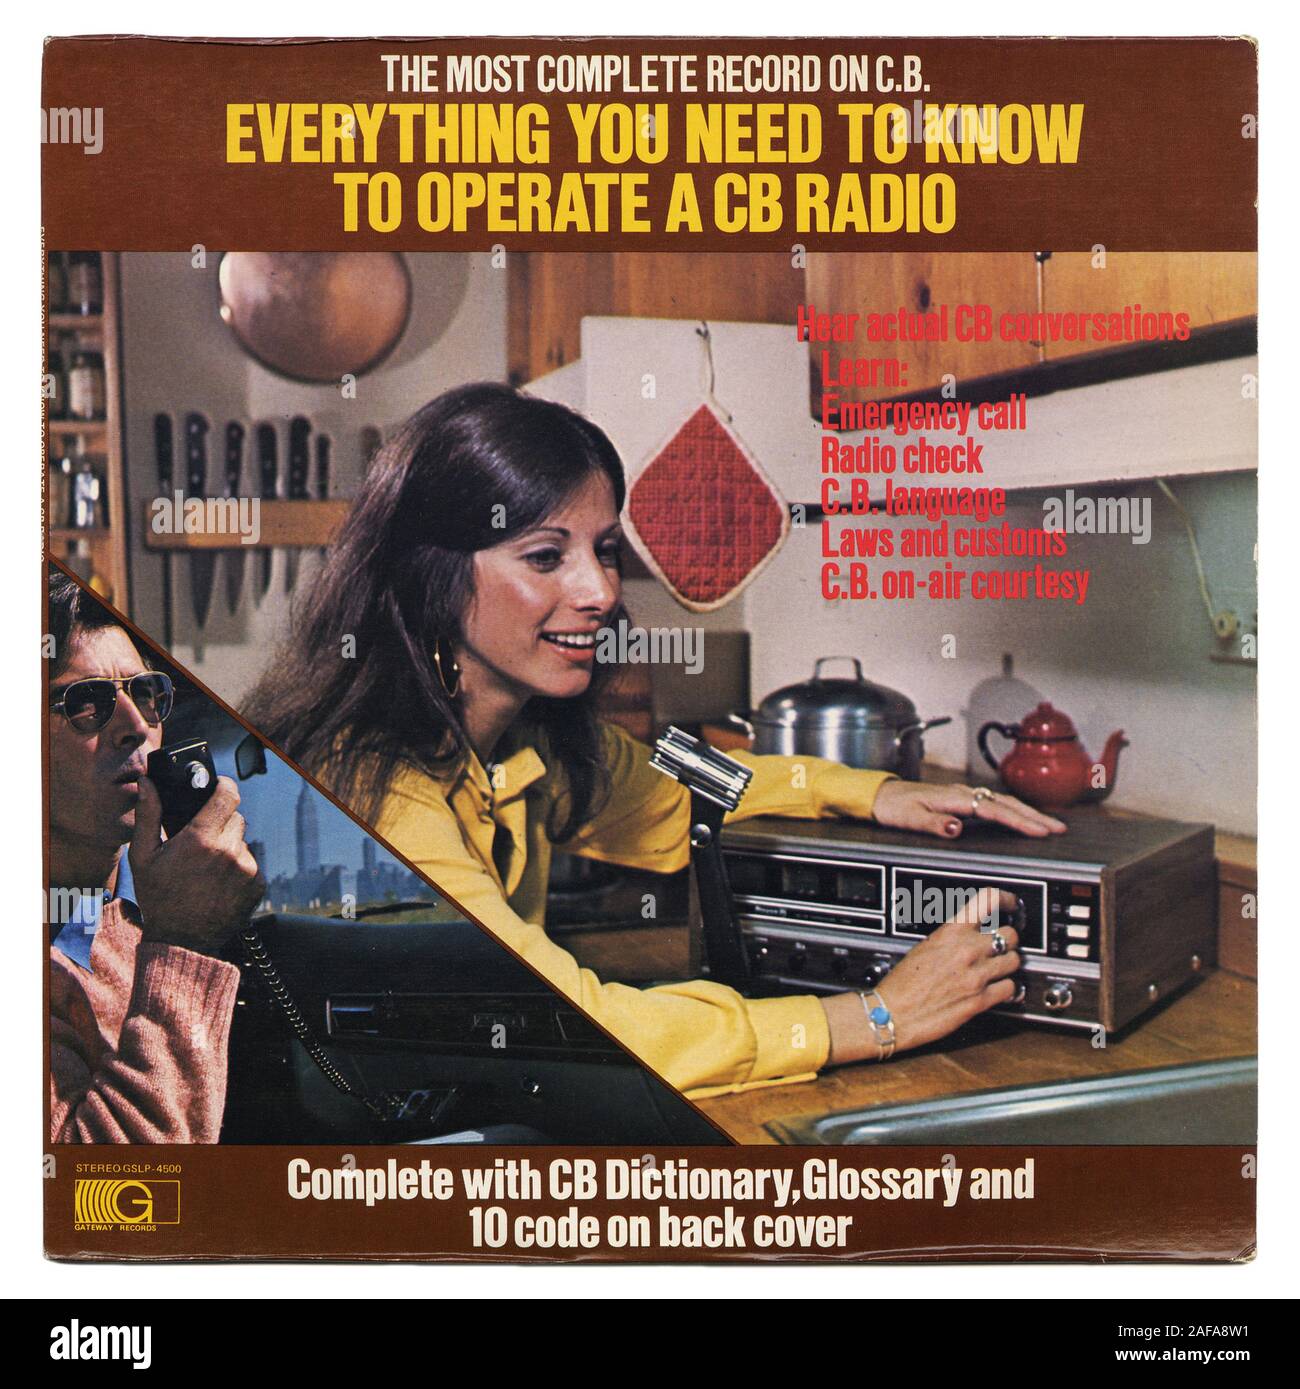 Everything You Need To Know To Operate A CB Radio - - Vintage vinyl record  cover Stock Photo - Alamy